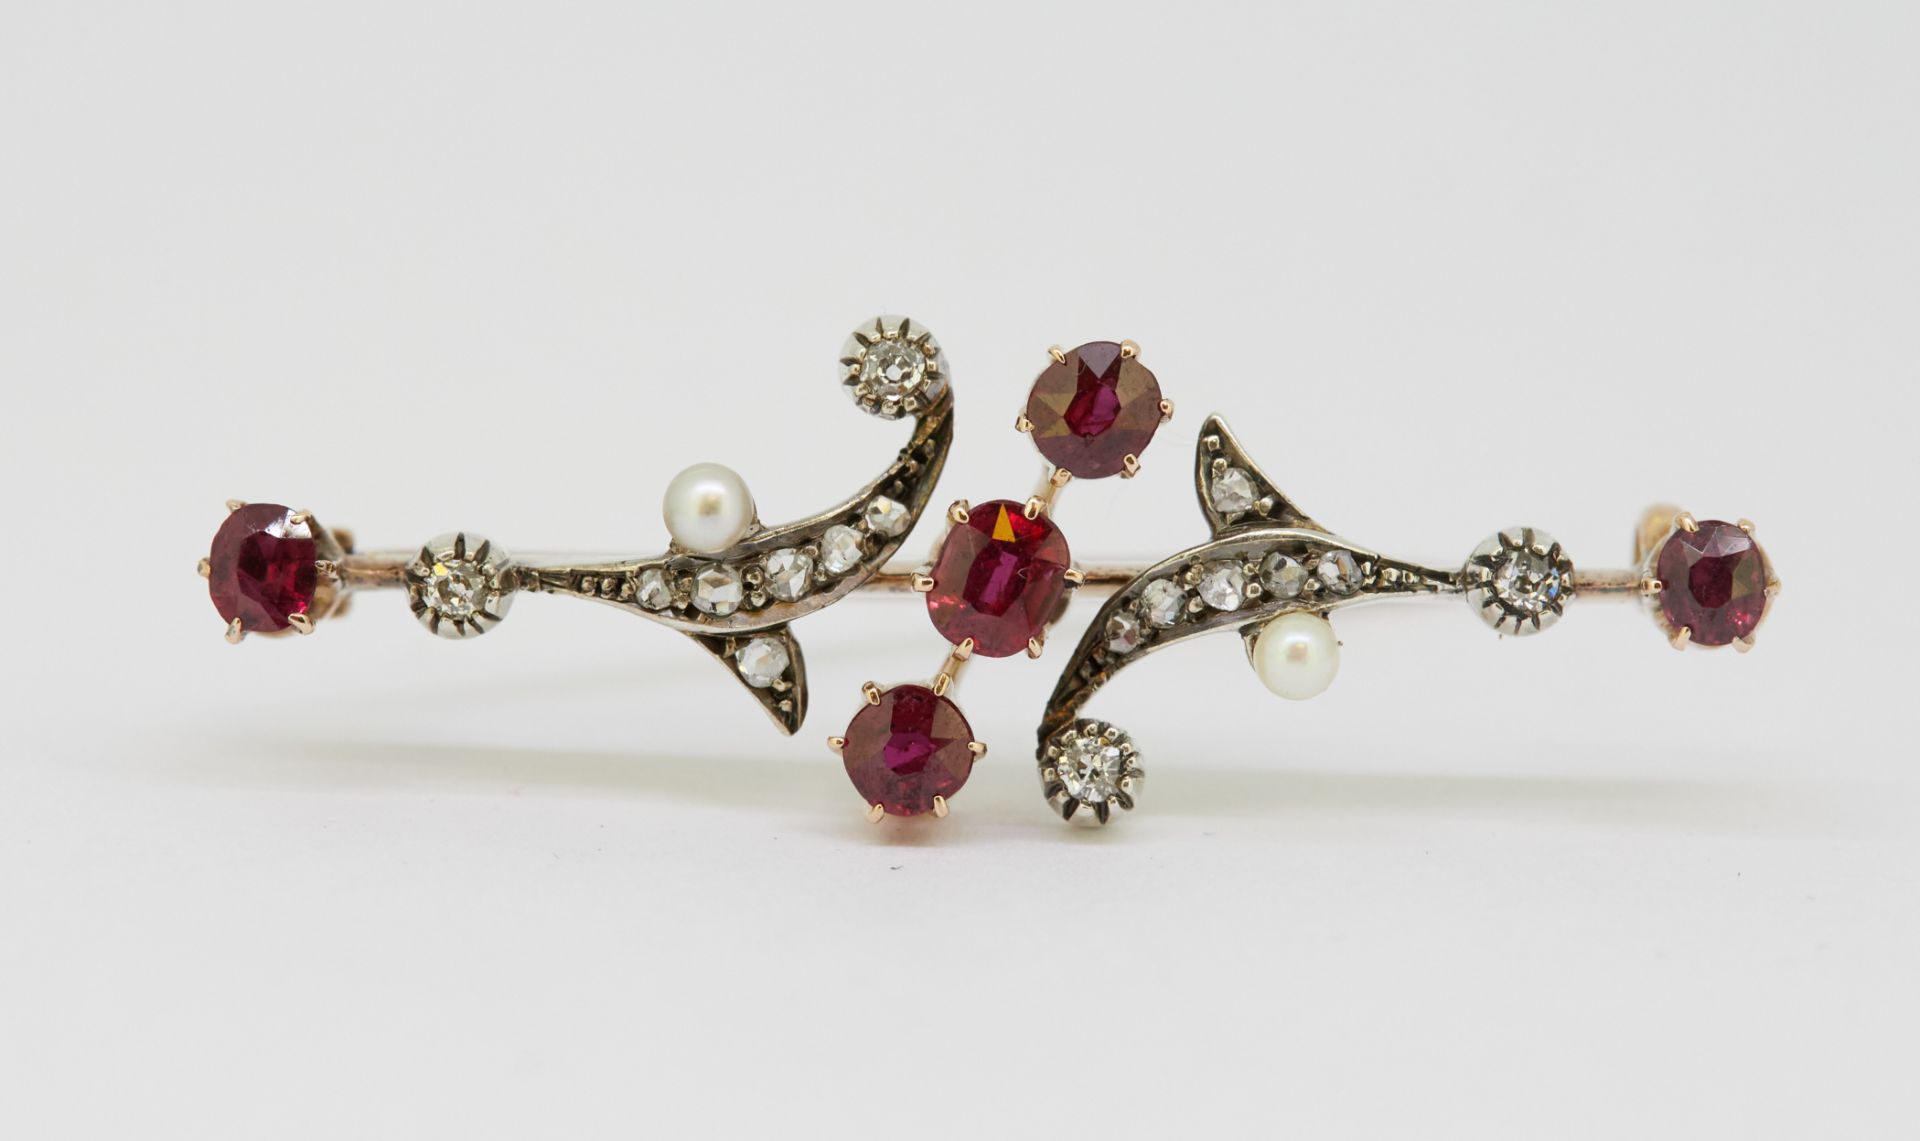 ANTIQUE RUBY DIAMOND AND PEARL BROOCH